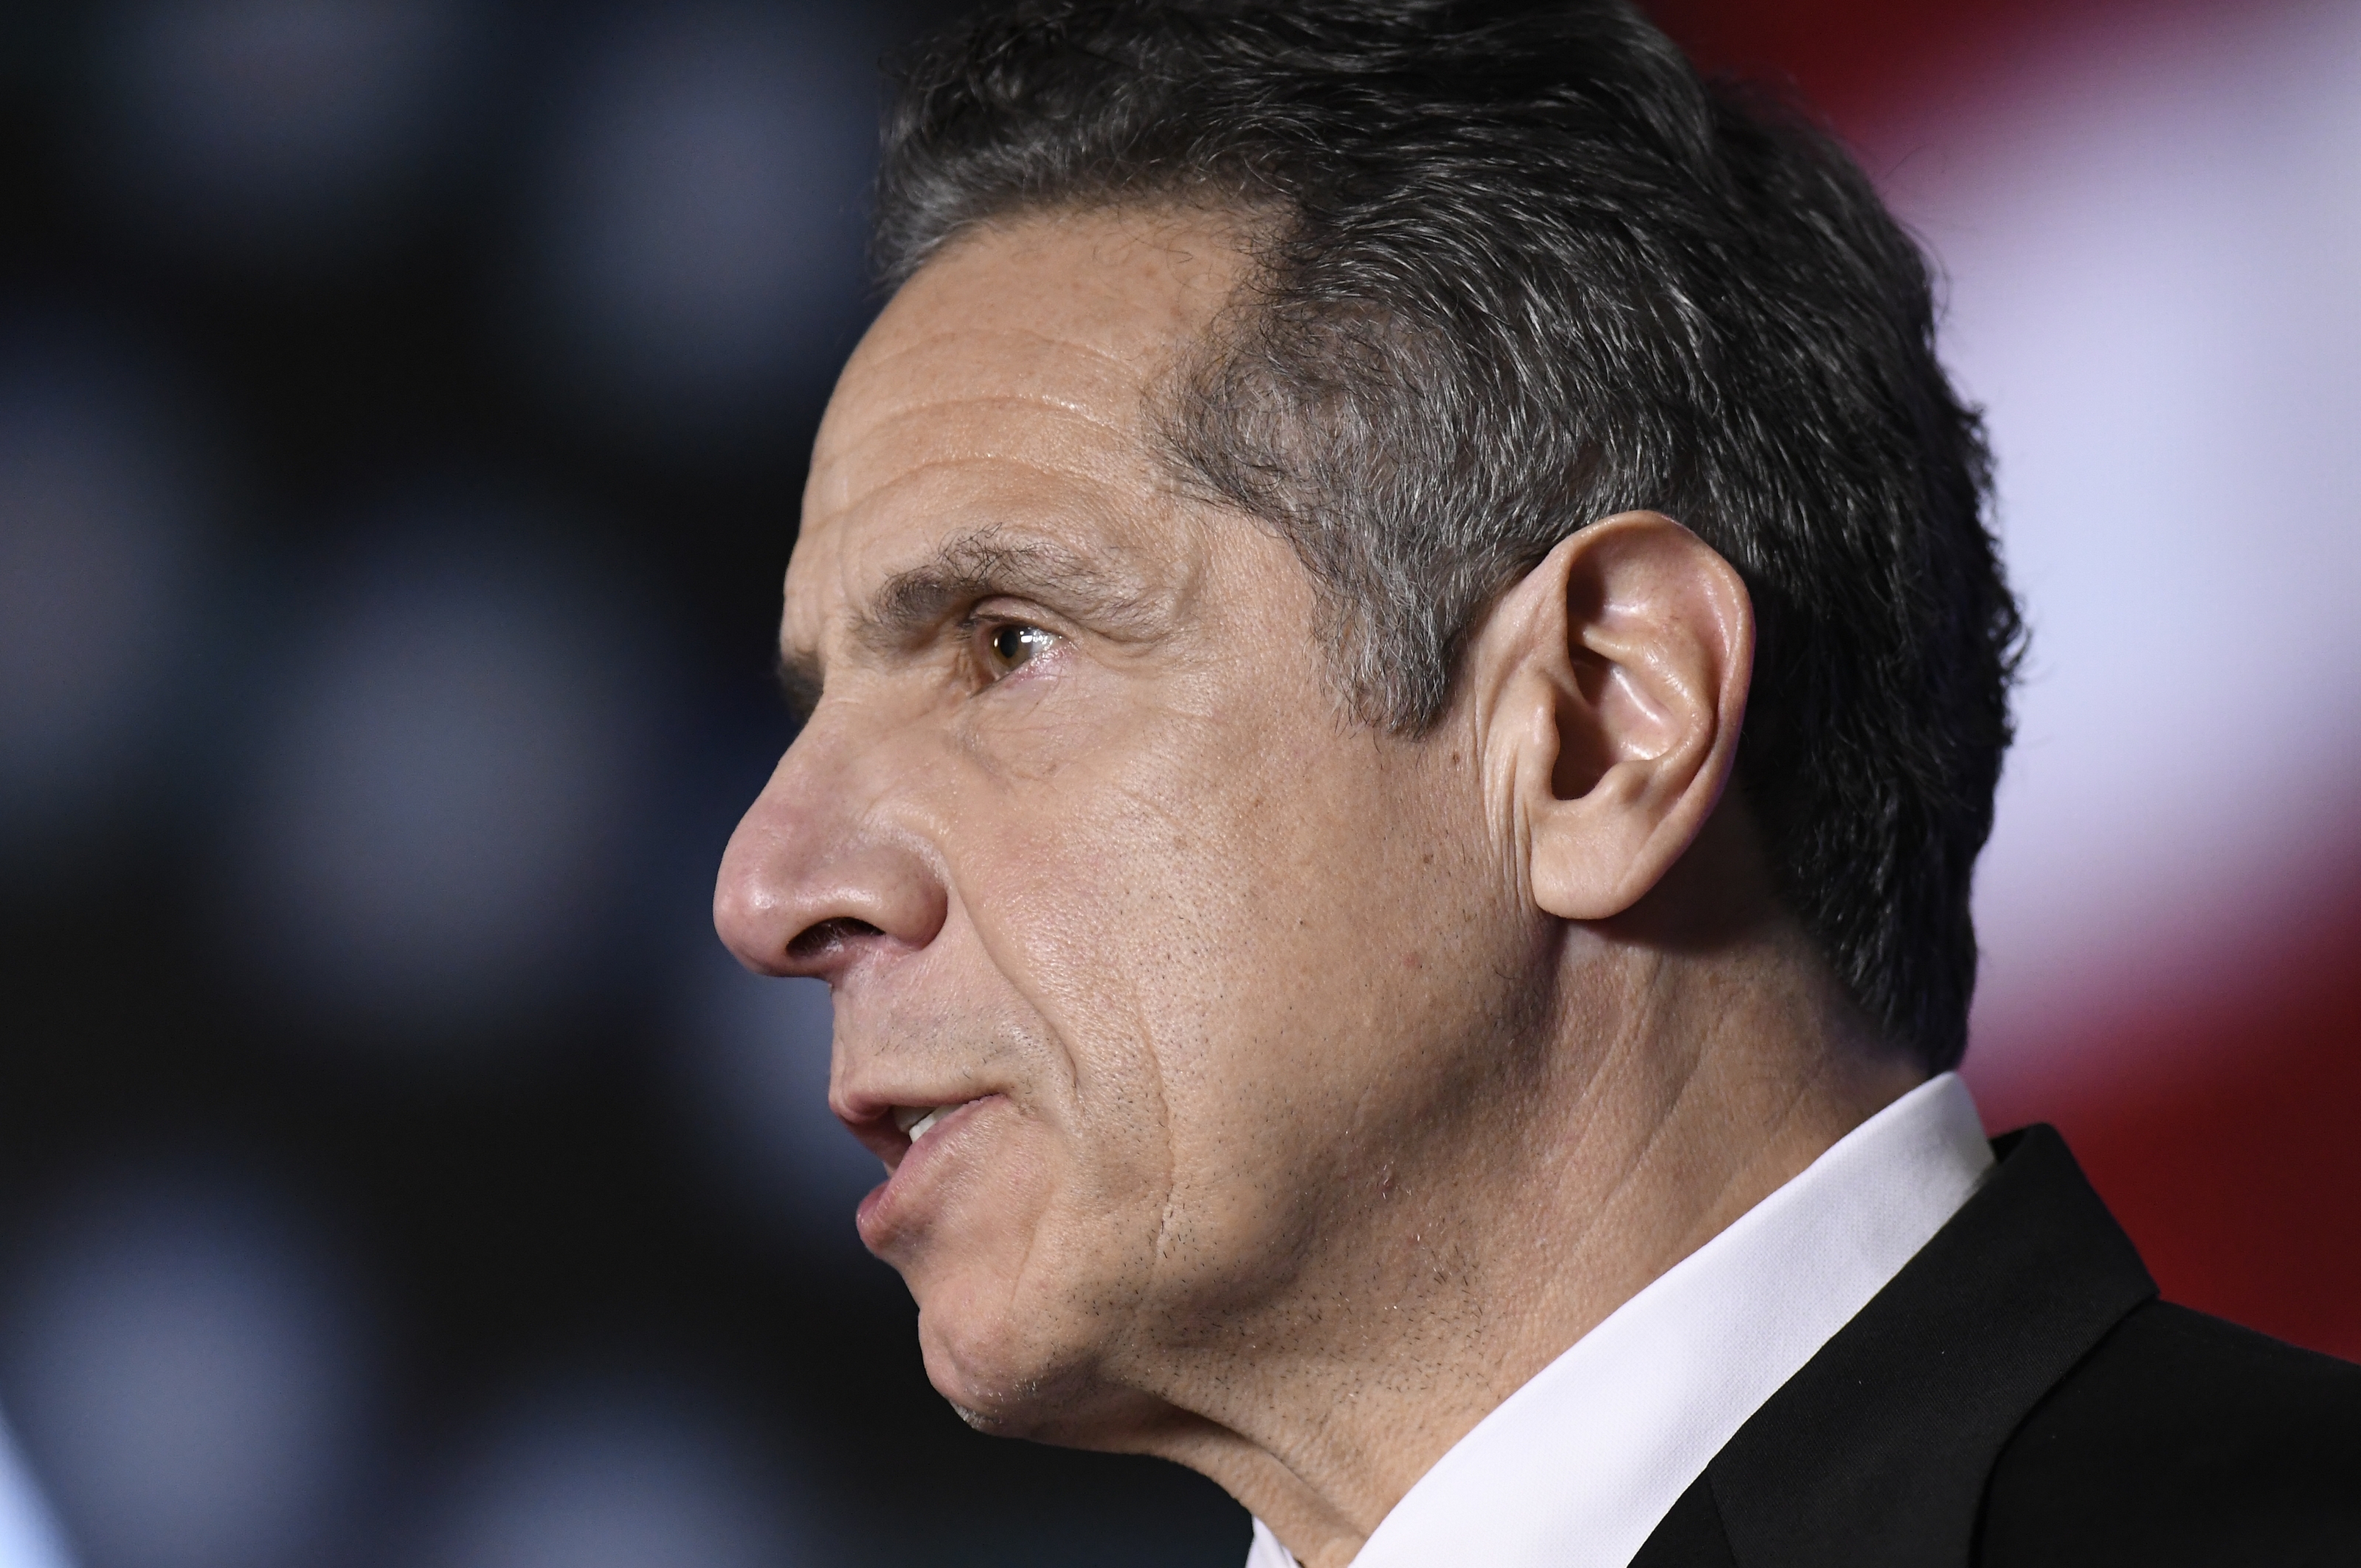 Cuomo’s resignations increase when the third accuser appears